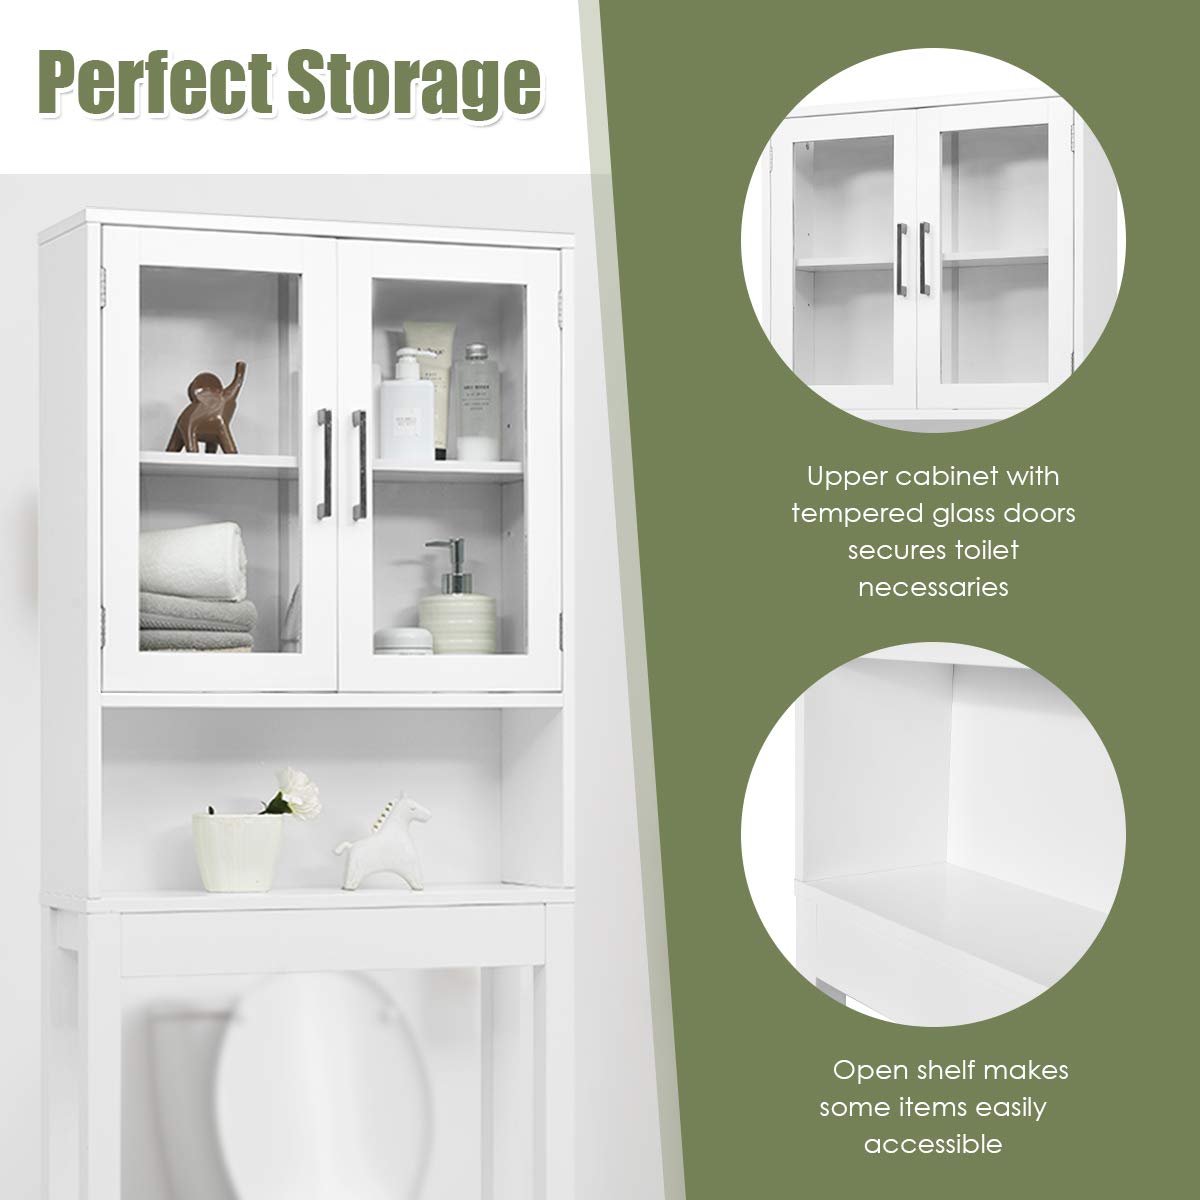 Giantex Over-The-Toilet Storage Cabinet W/Tempered Glass Doors, 3-Position Adjustable Shelf